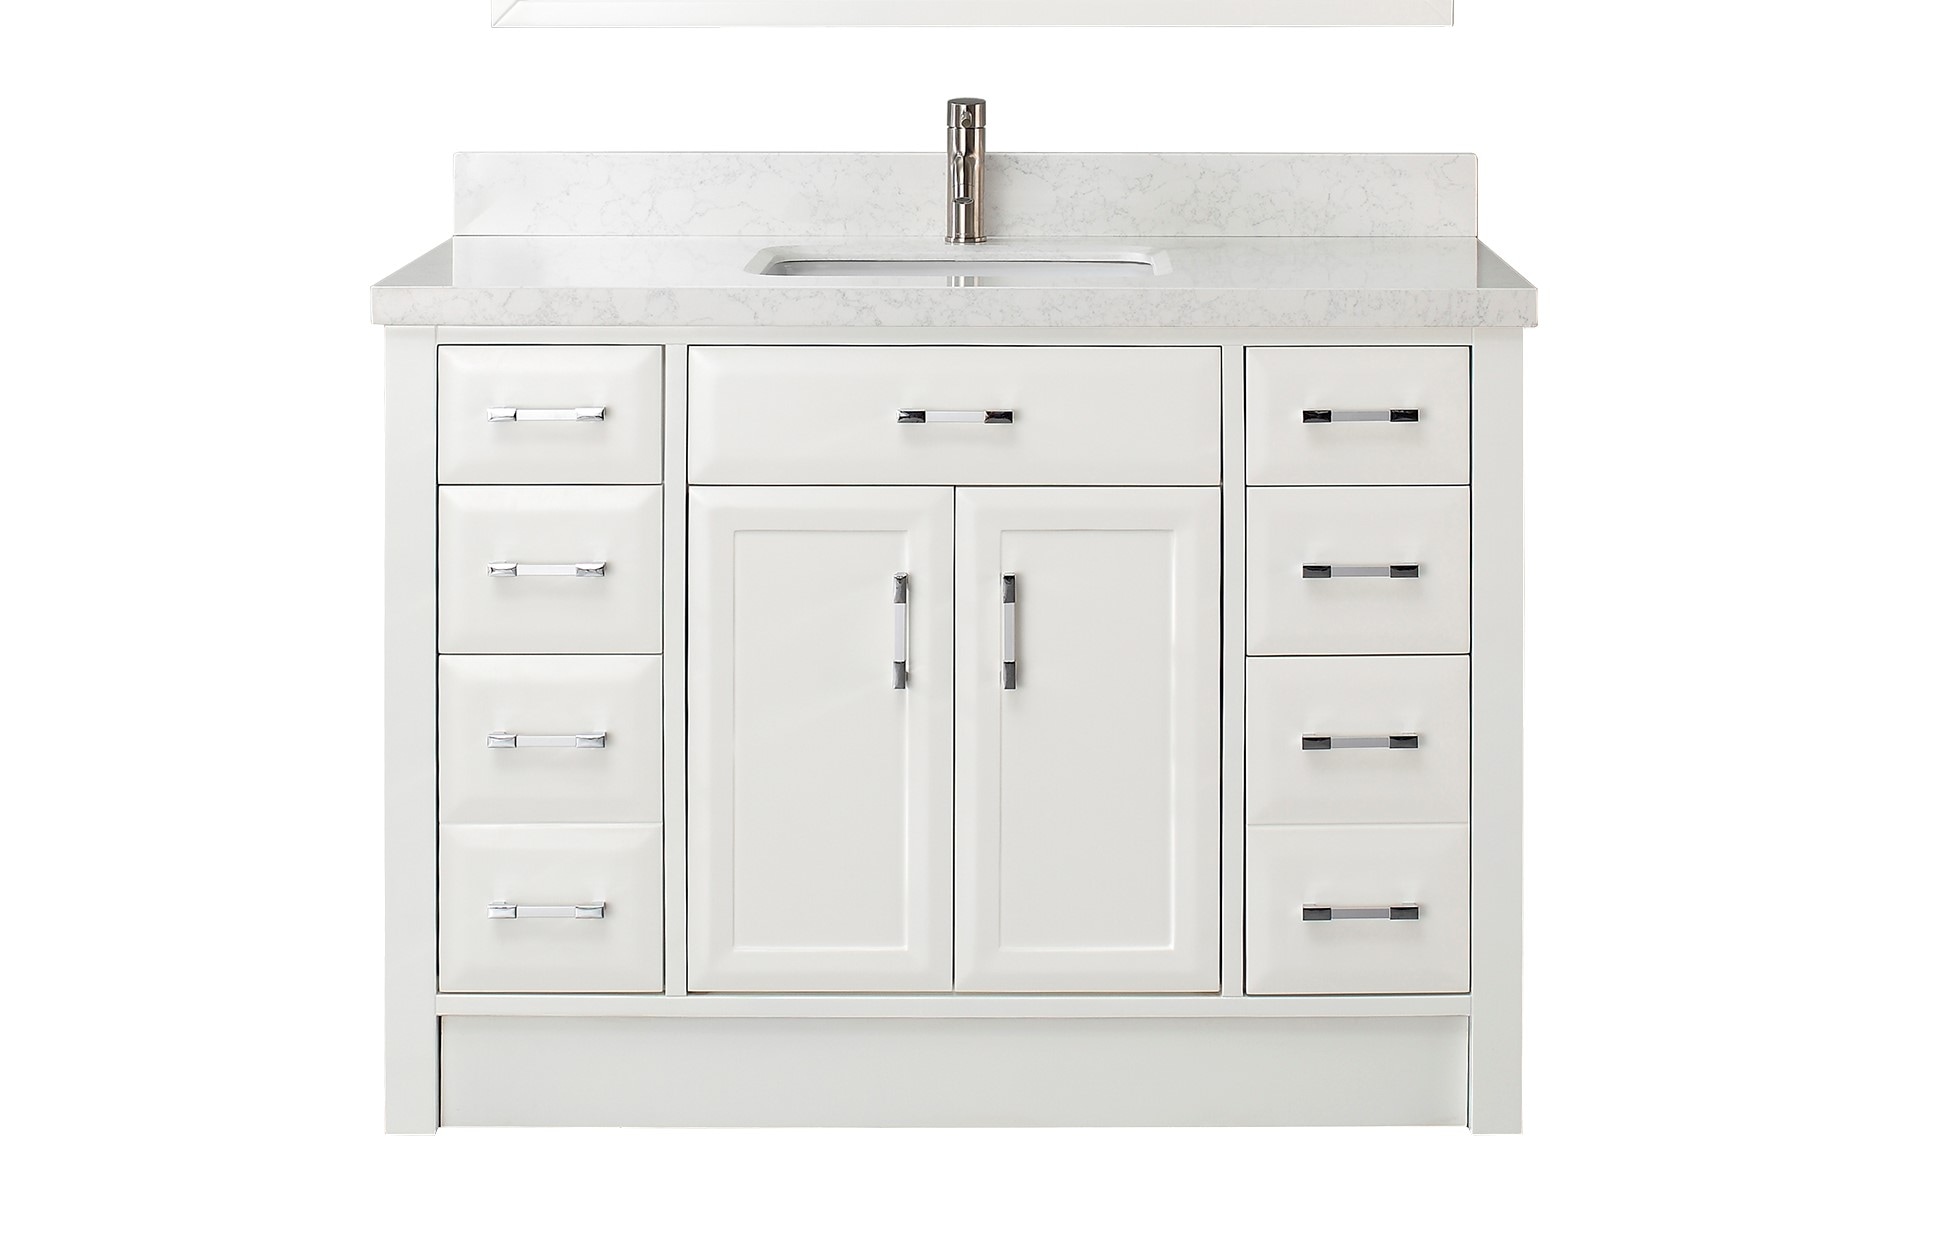 20 by 41 inch bathroom countertop with sink